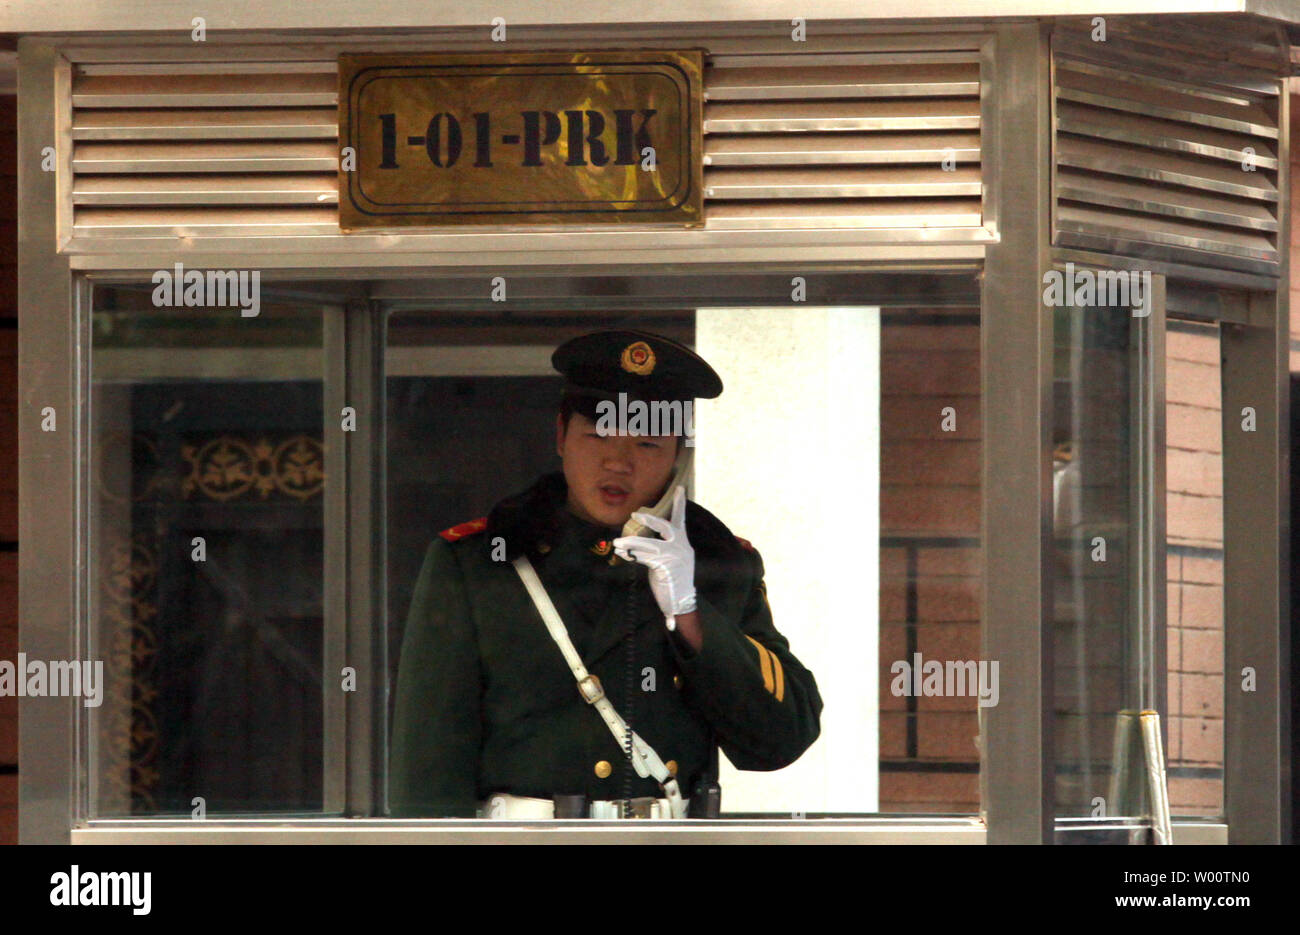 Chinese soldiers guard the North Korean embassy in Beijing November 29, 2010.  China remains Pyongyang's biggest trade partner and arguably has the most leverage on Kim Jon-Il's regime. North Korea placed surface-t-surface missiles on launch pads in the Yellow Sea, South Korea's state press said, as the United States and South Korea began military drills and China called for emergency talks.     UPI/Stephen Shaver Stock Photo